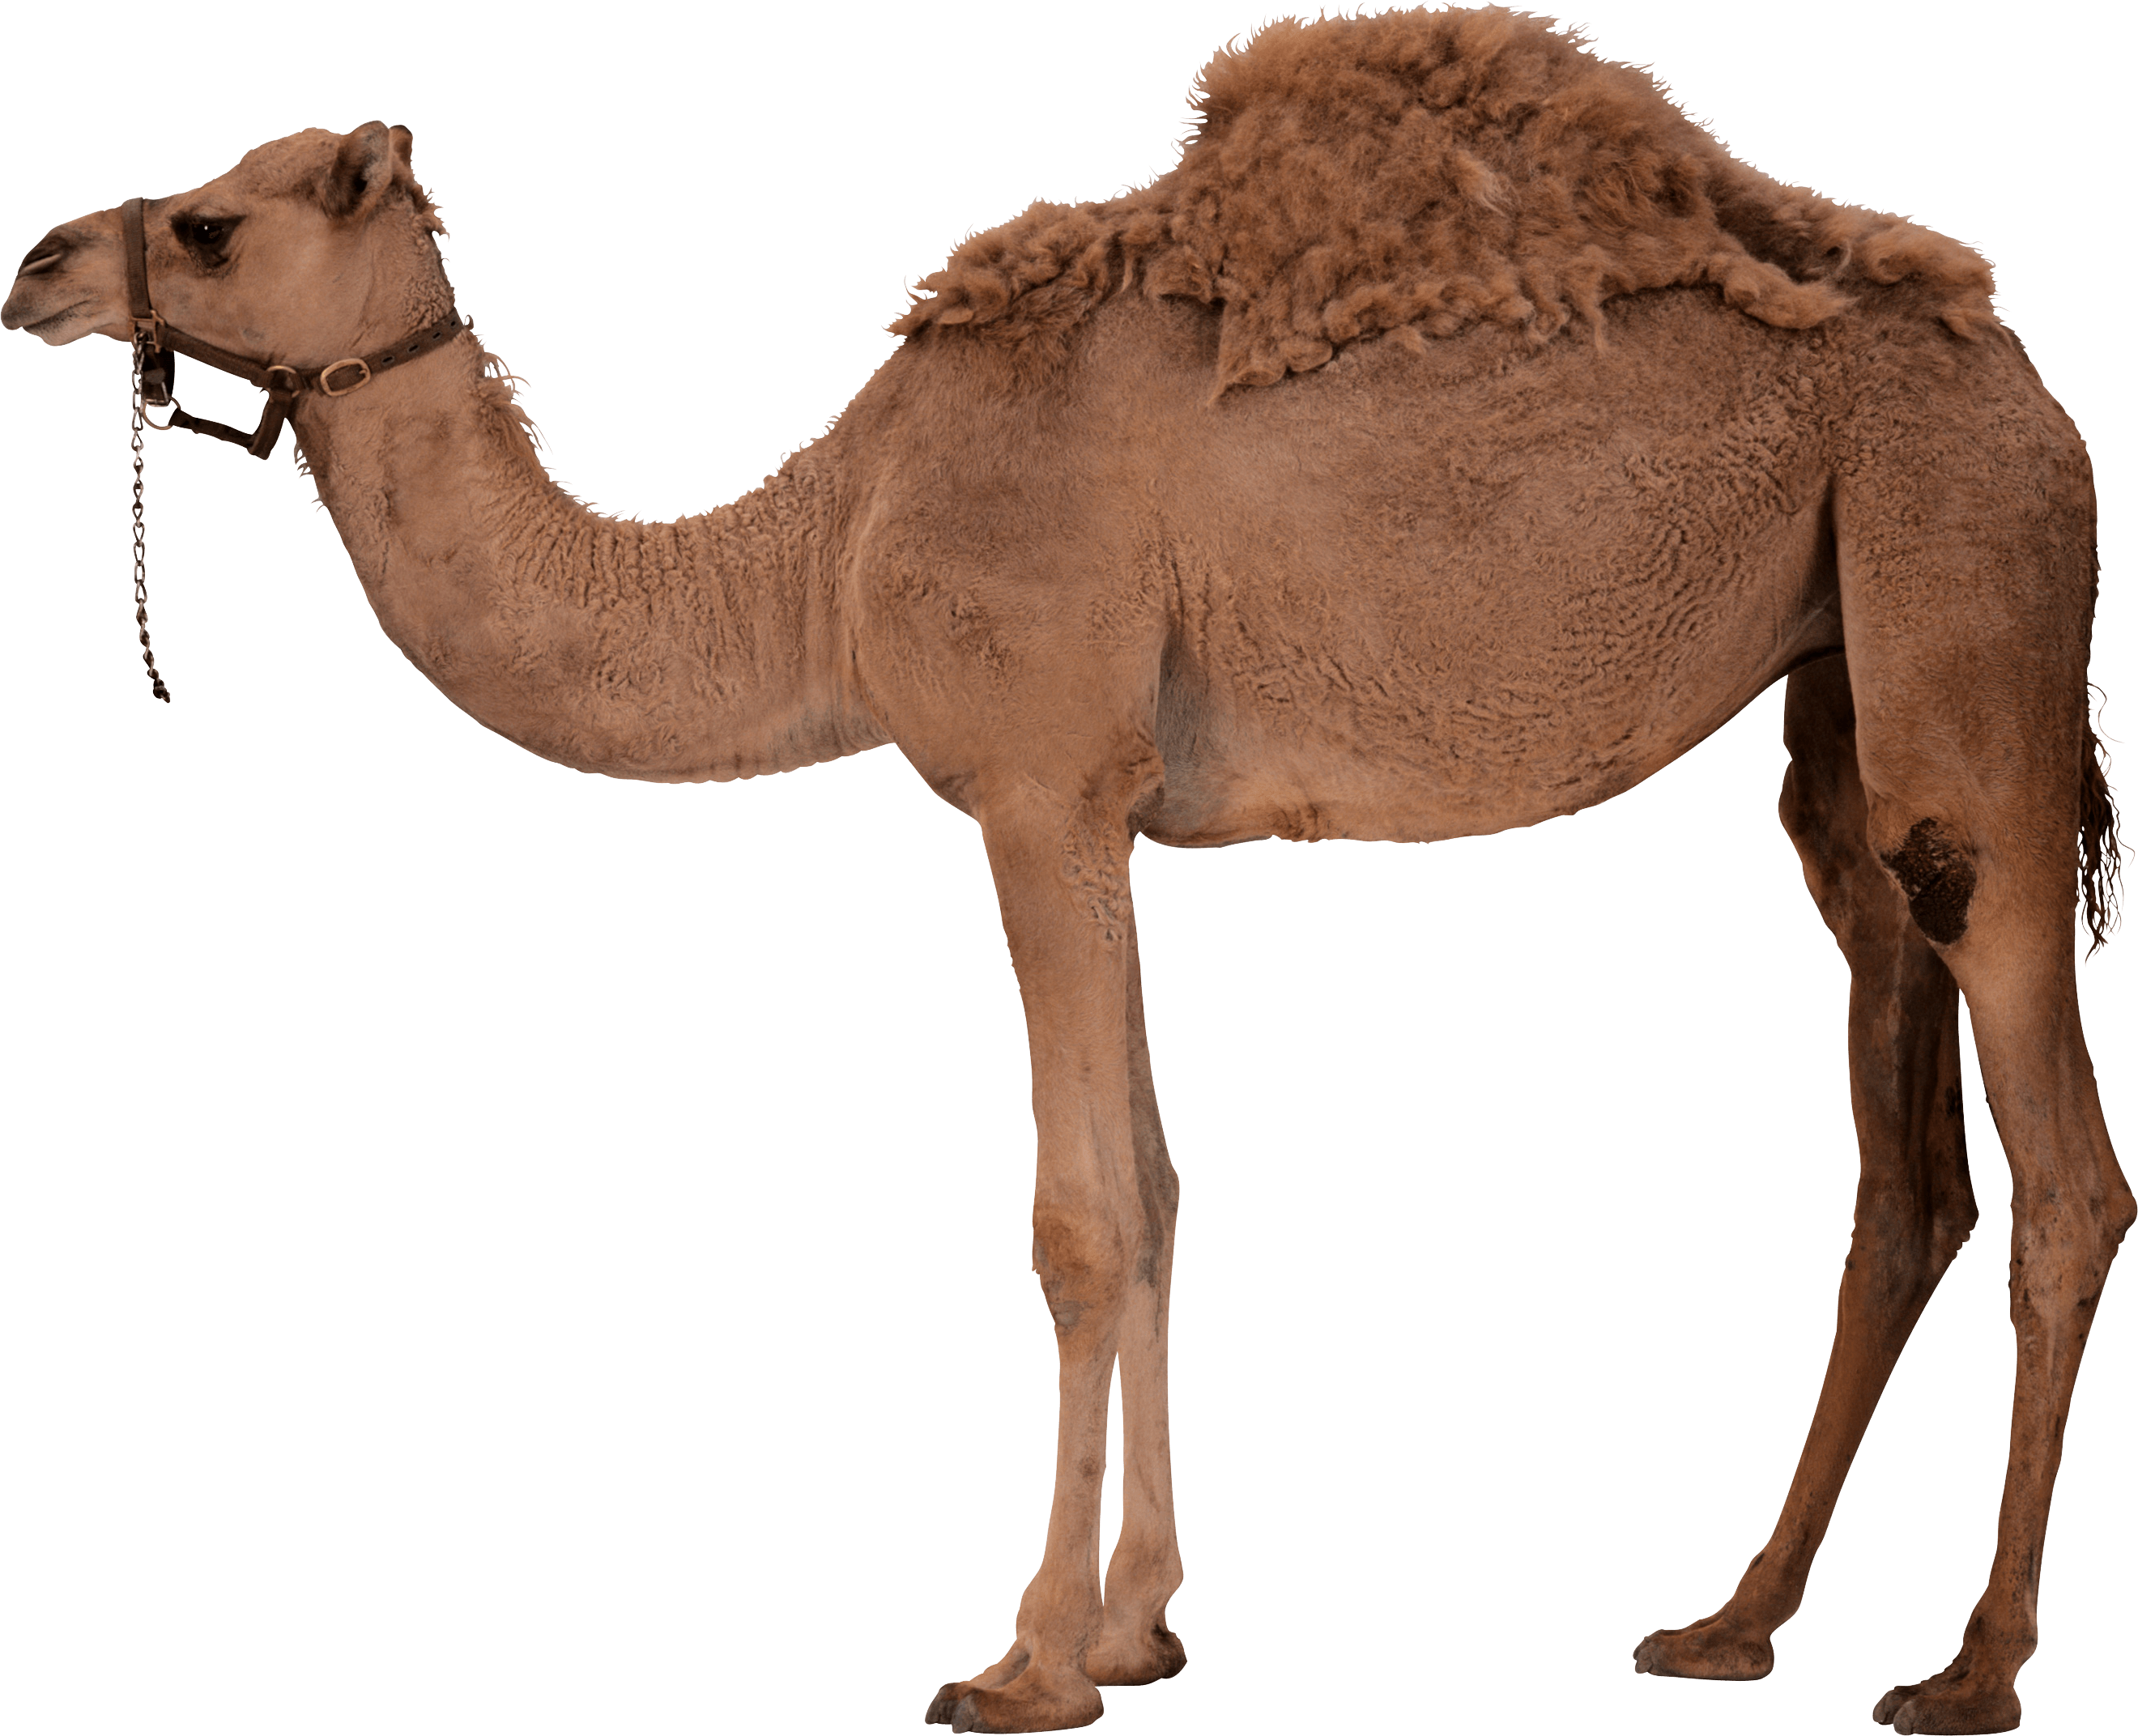 Download Camel PNG Image for Free